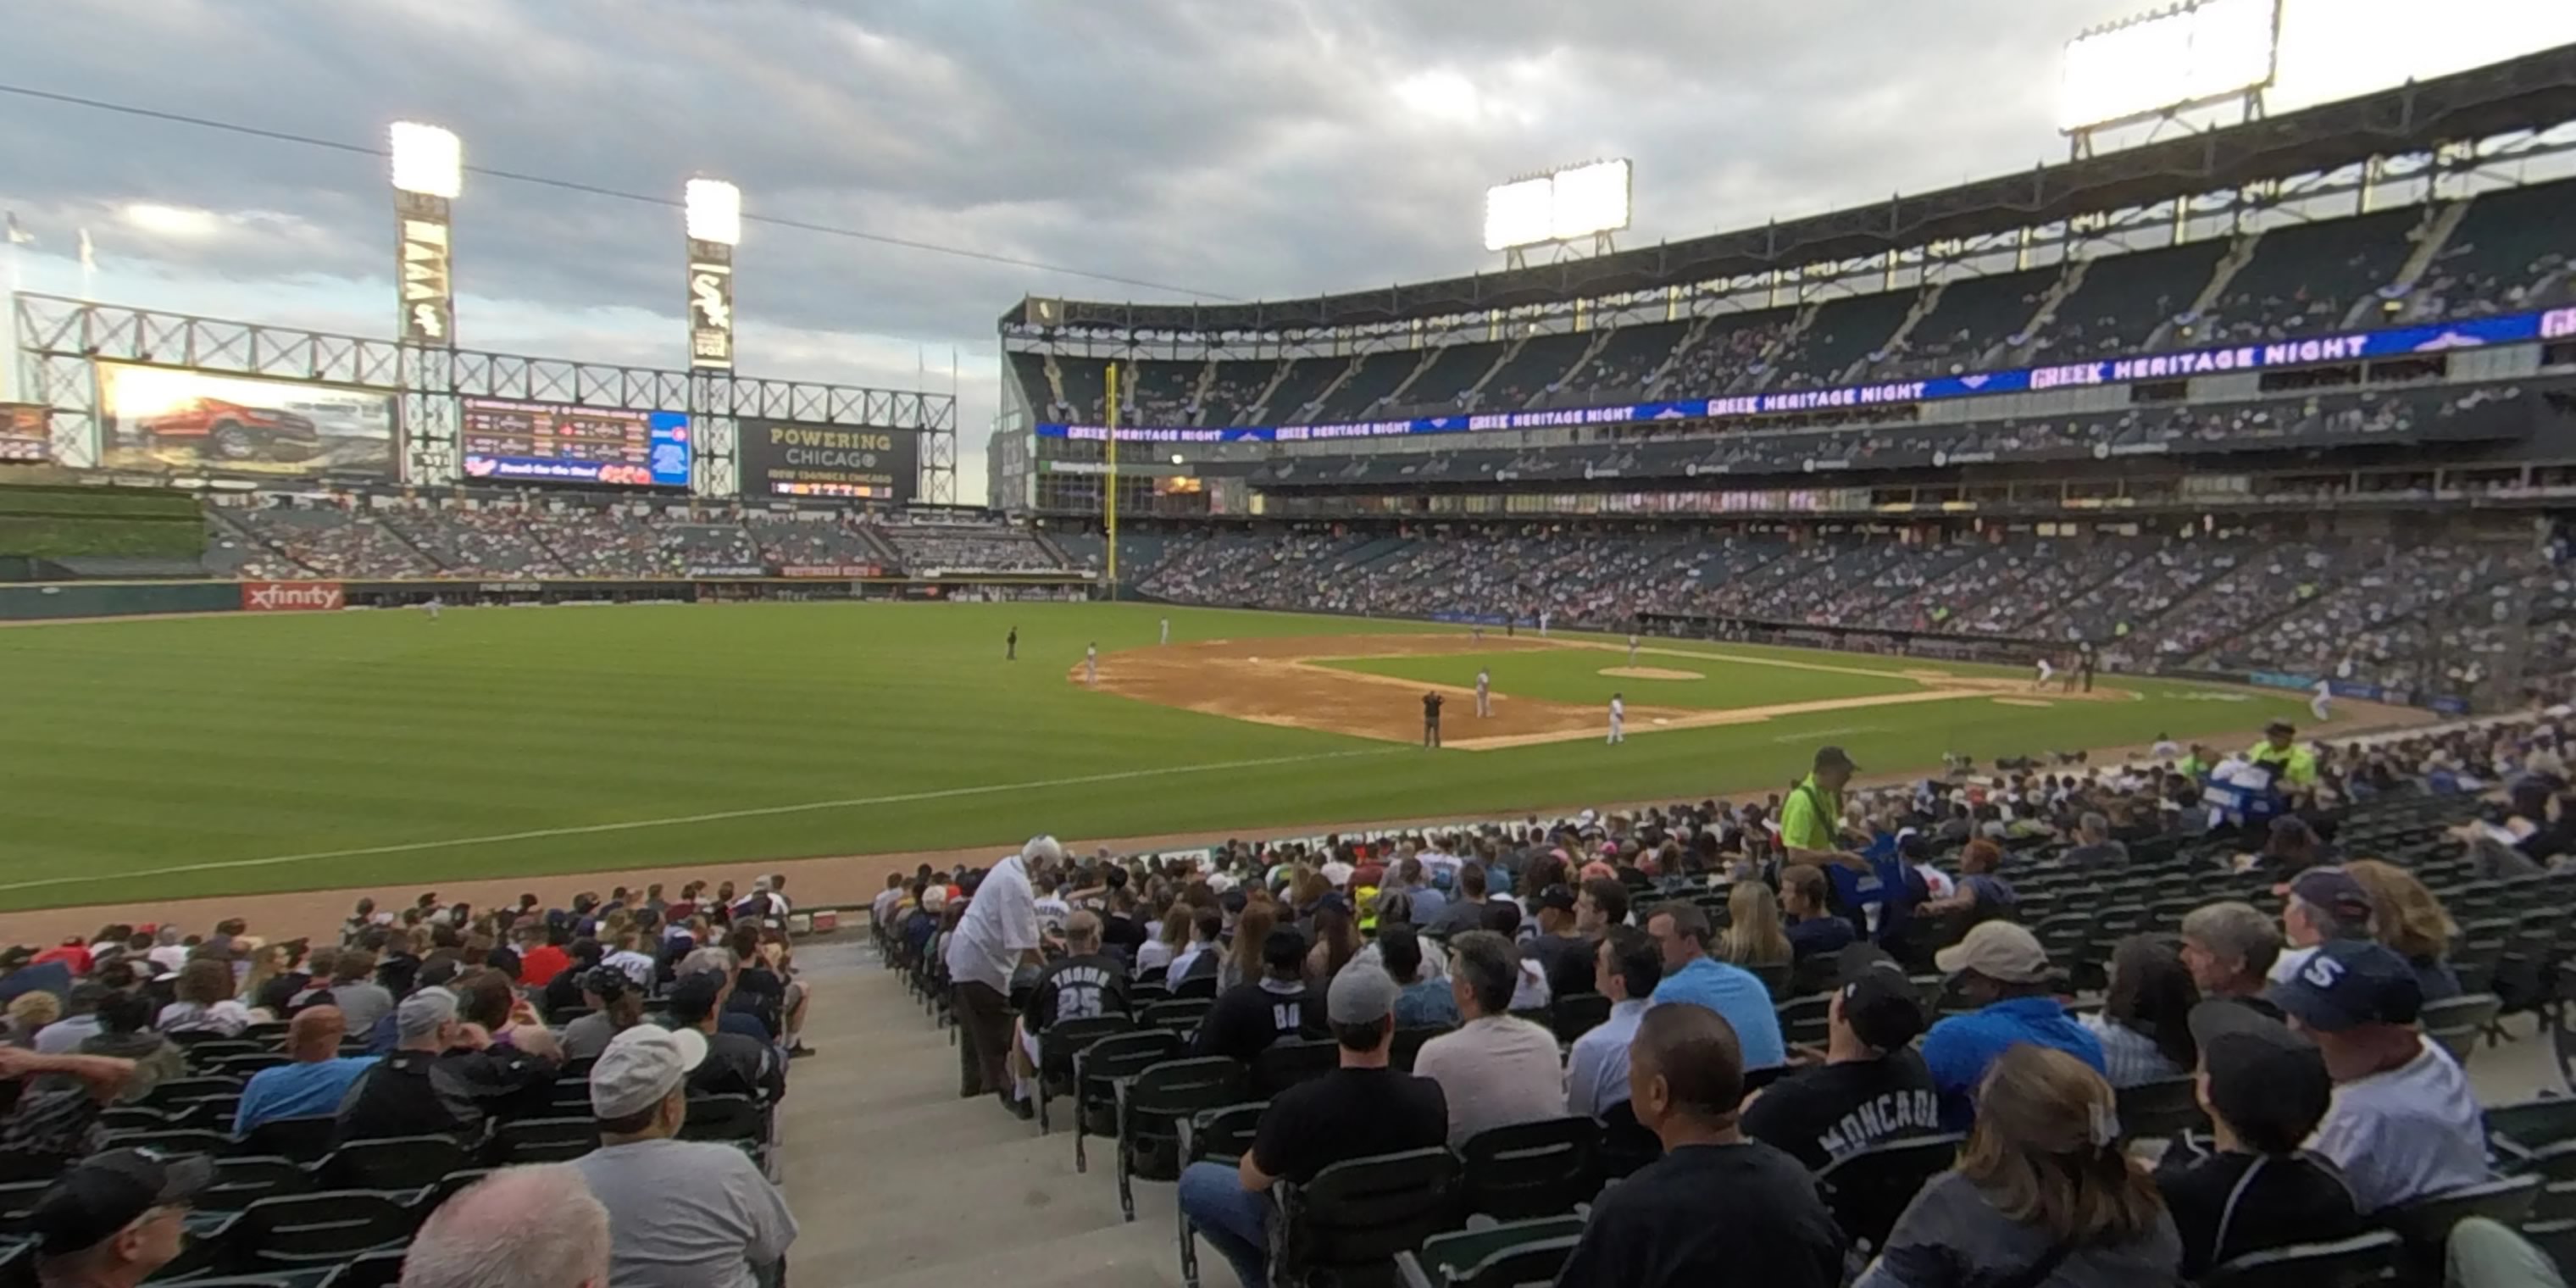 section 146 panoramic seat view  - guaranteed rate field